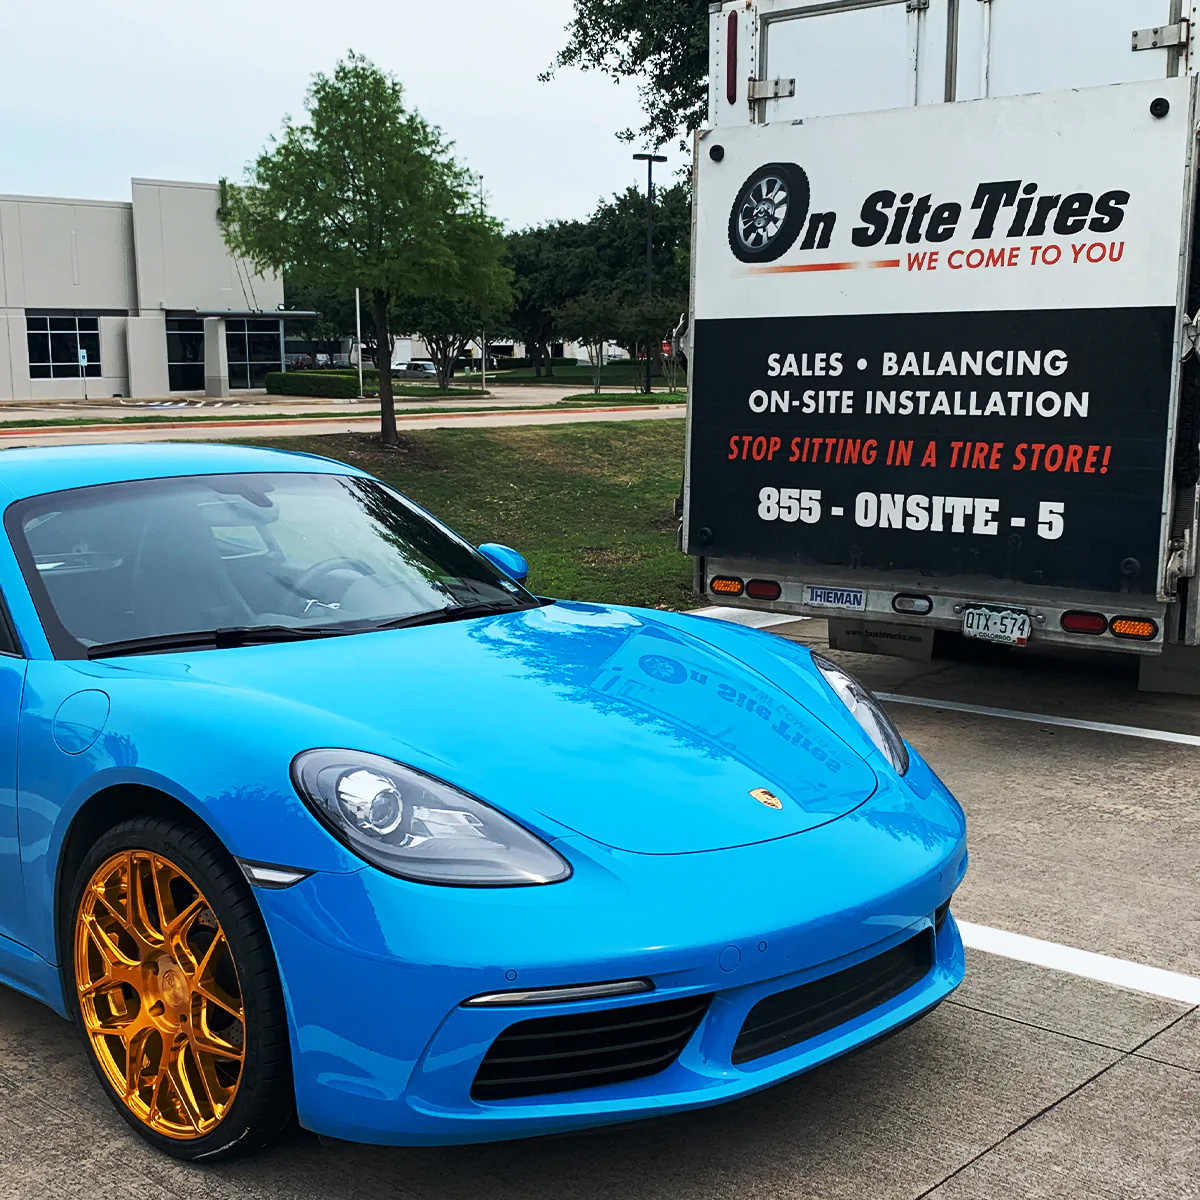 Porsche Service with On-Site Mobile Tire Store in Denver, CO